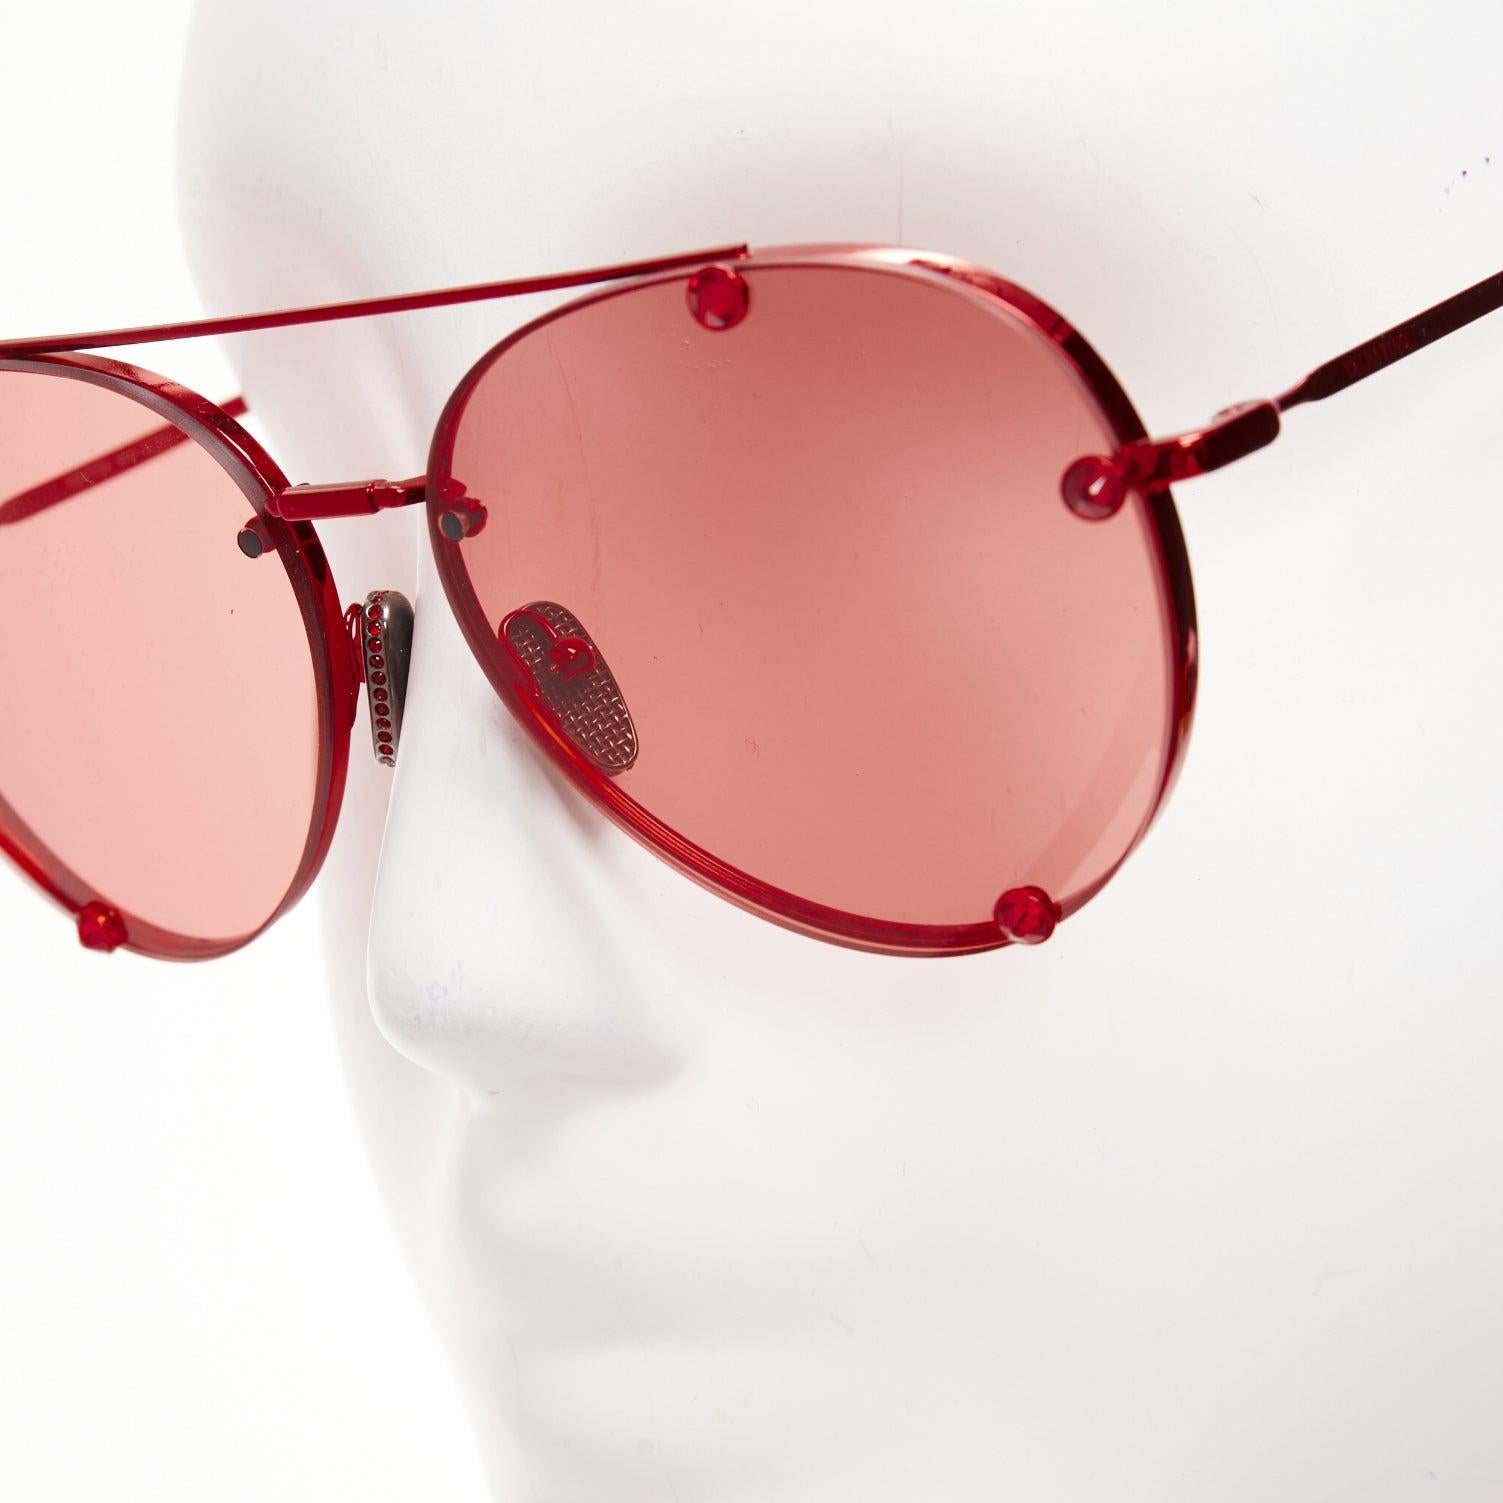 VALENTINO VA2045 red crystal lens metallic finish aviator sunglasses
Reference: AAWC/A00922
Brand: Valentino
Model: VA2045
Material: Metal
Color: Red
Pattern: Solid
Lining: Red Metal
Extra Details: Logo at sides.
Made in: